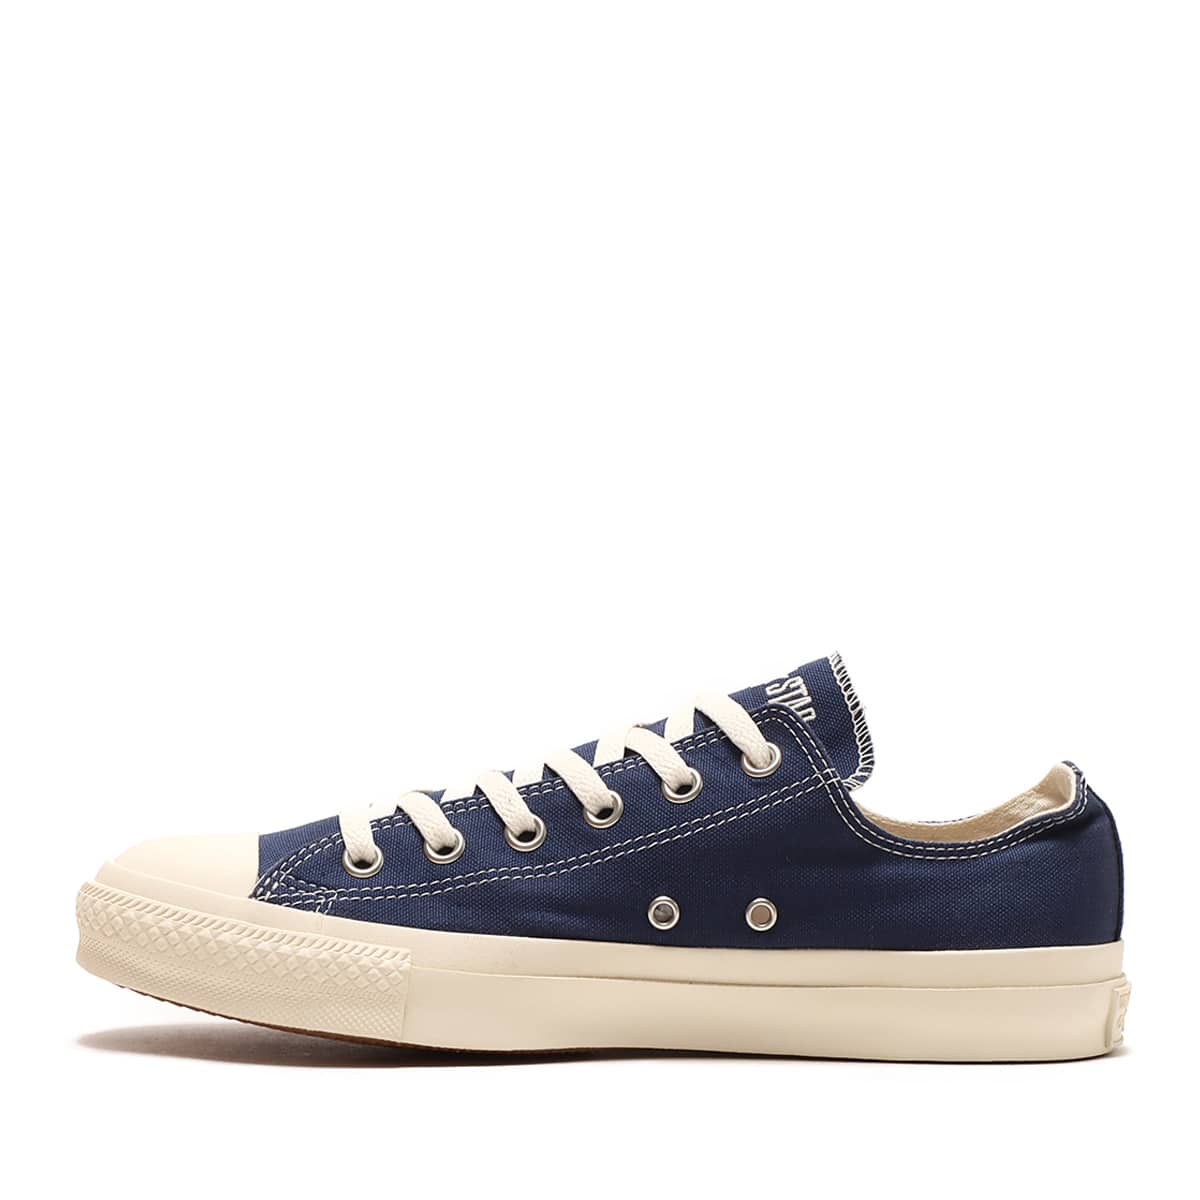 CONVERSE ALL STAR NV-ARMY'S OX NAVY 23SS-I